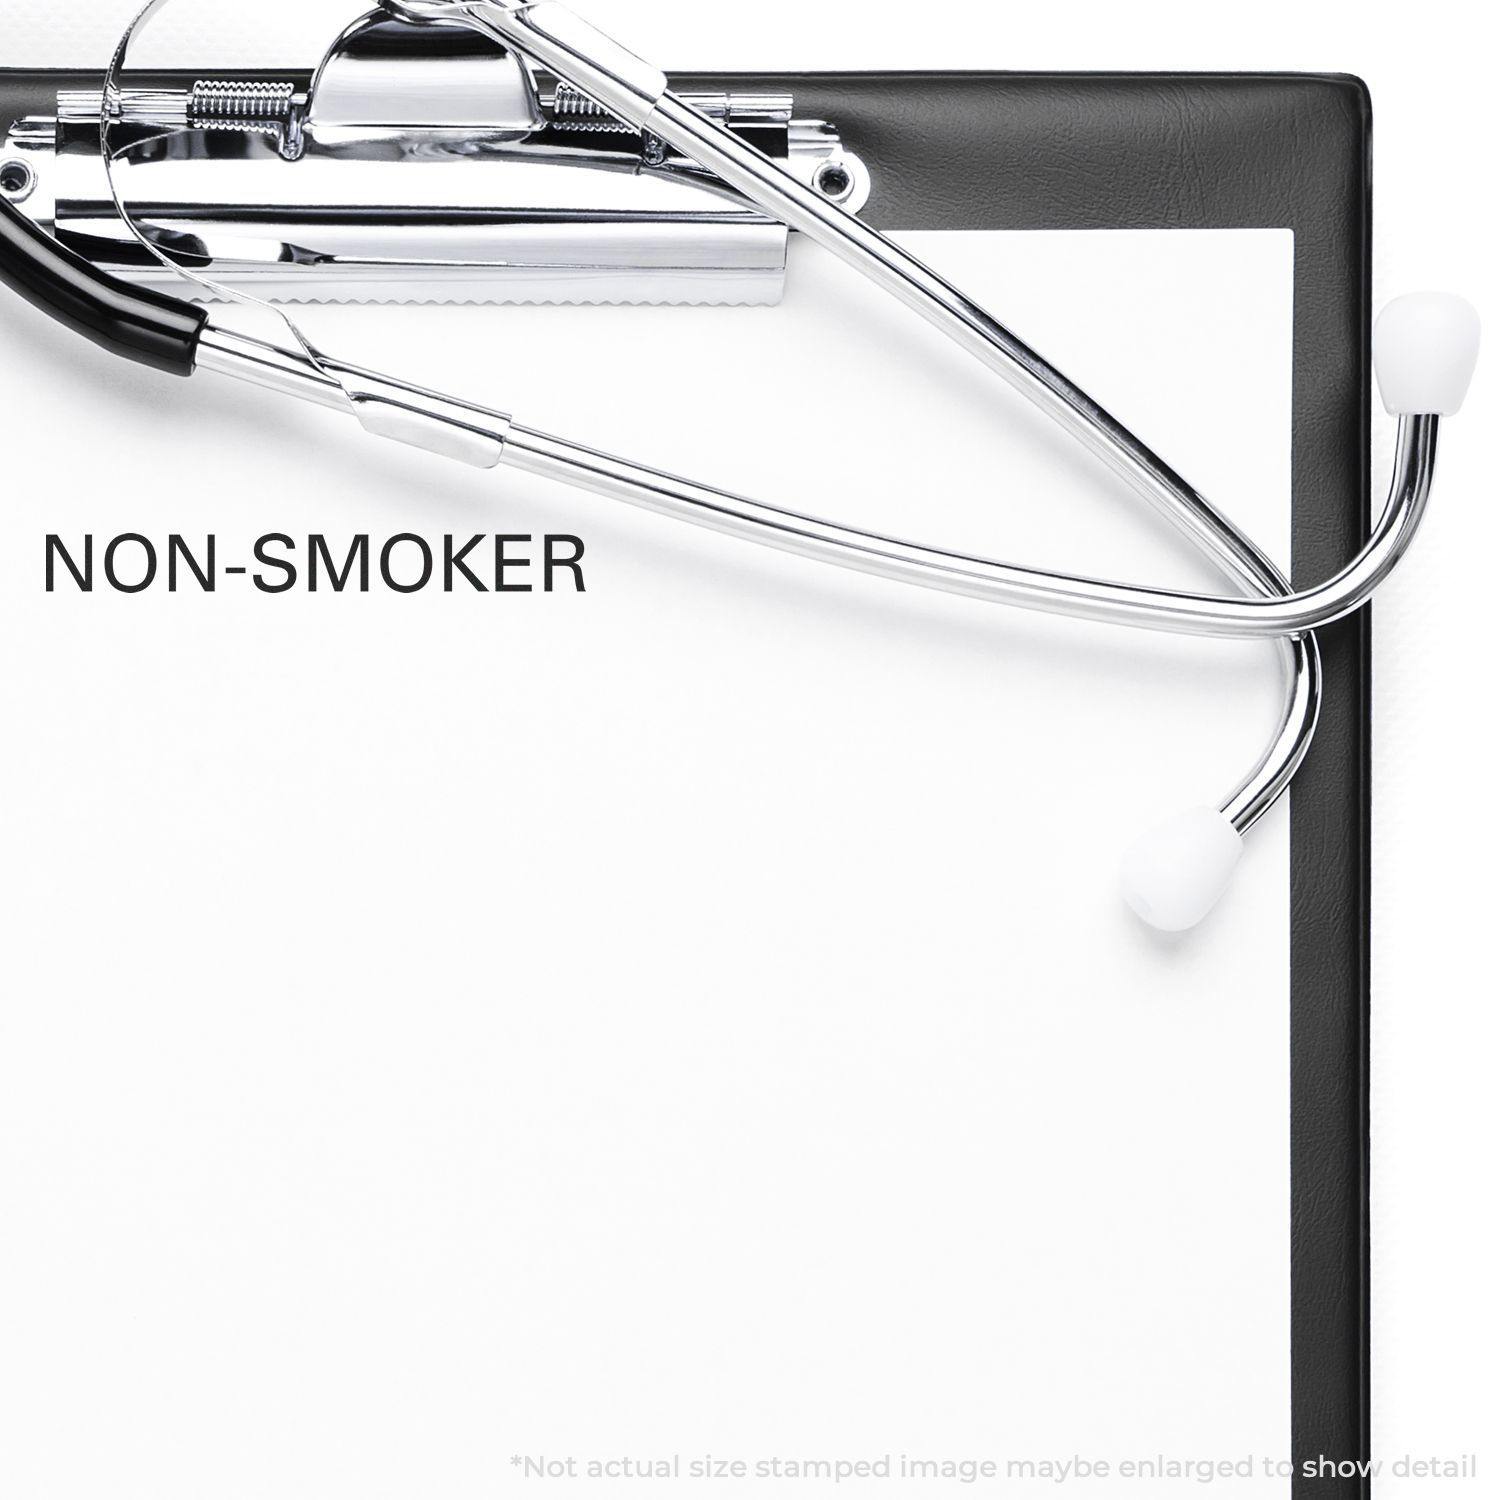 In Use Large Pre-Inked Non-Smoker Stamp Image